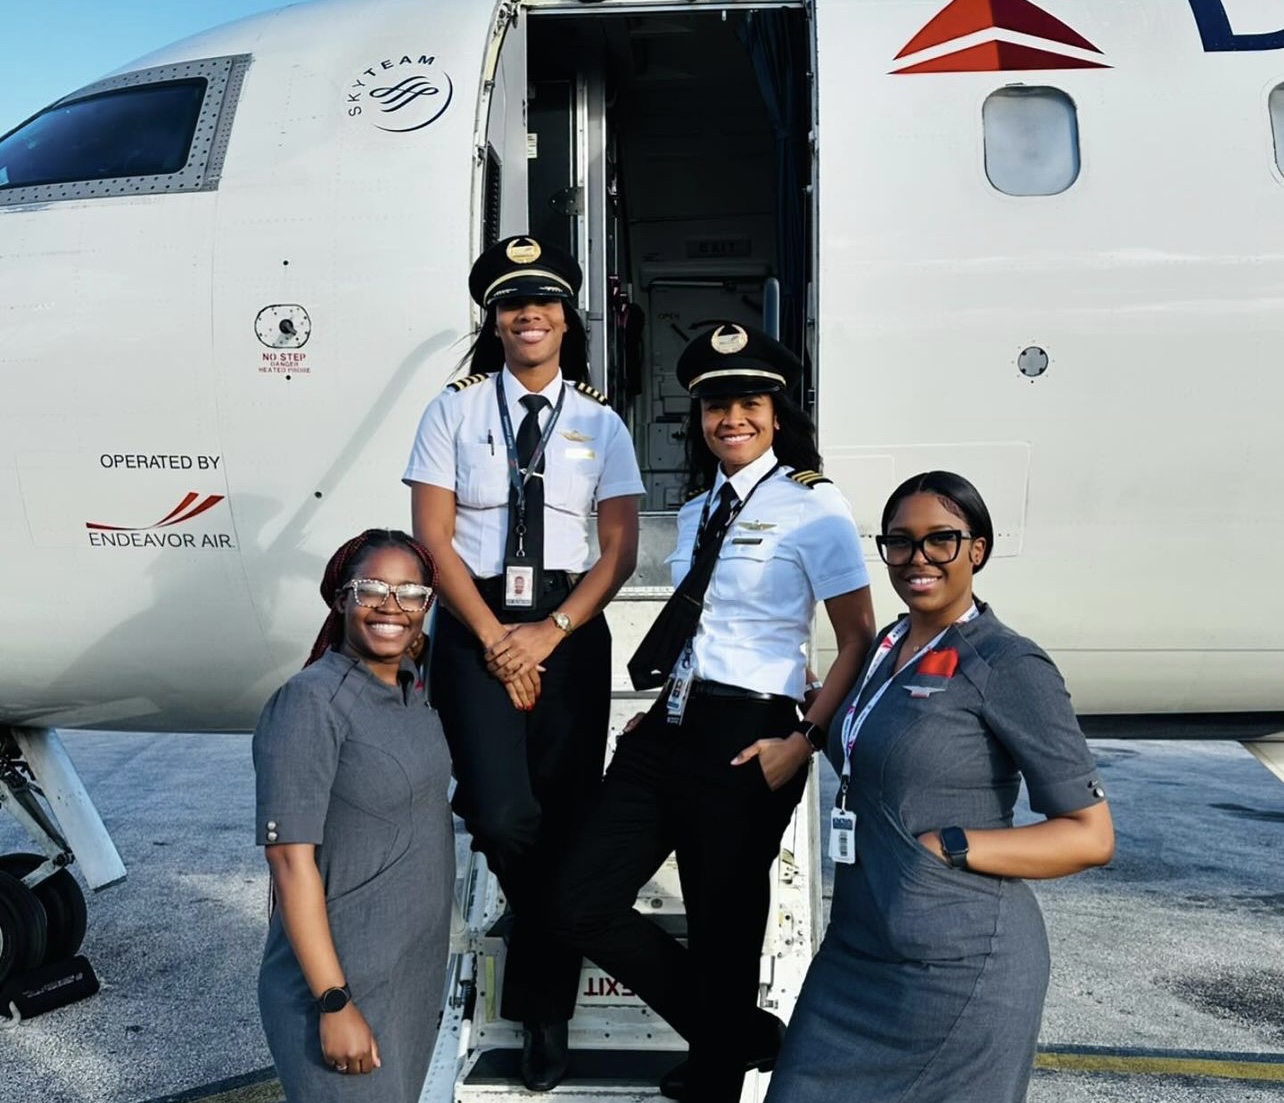 Less Than 1% Of U.S. Pilots Are Black Women. 'Sisters Of The Skies' Aims To Change That